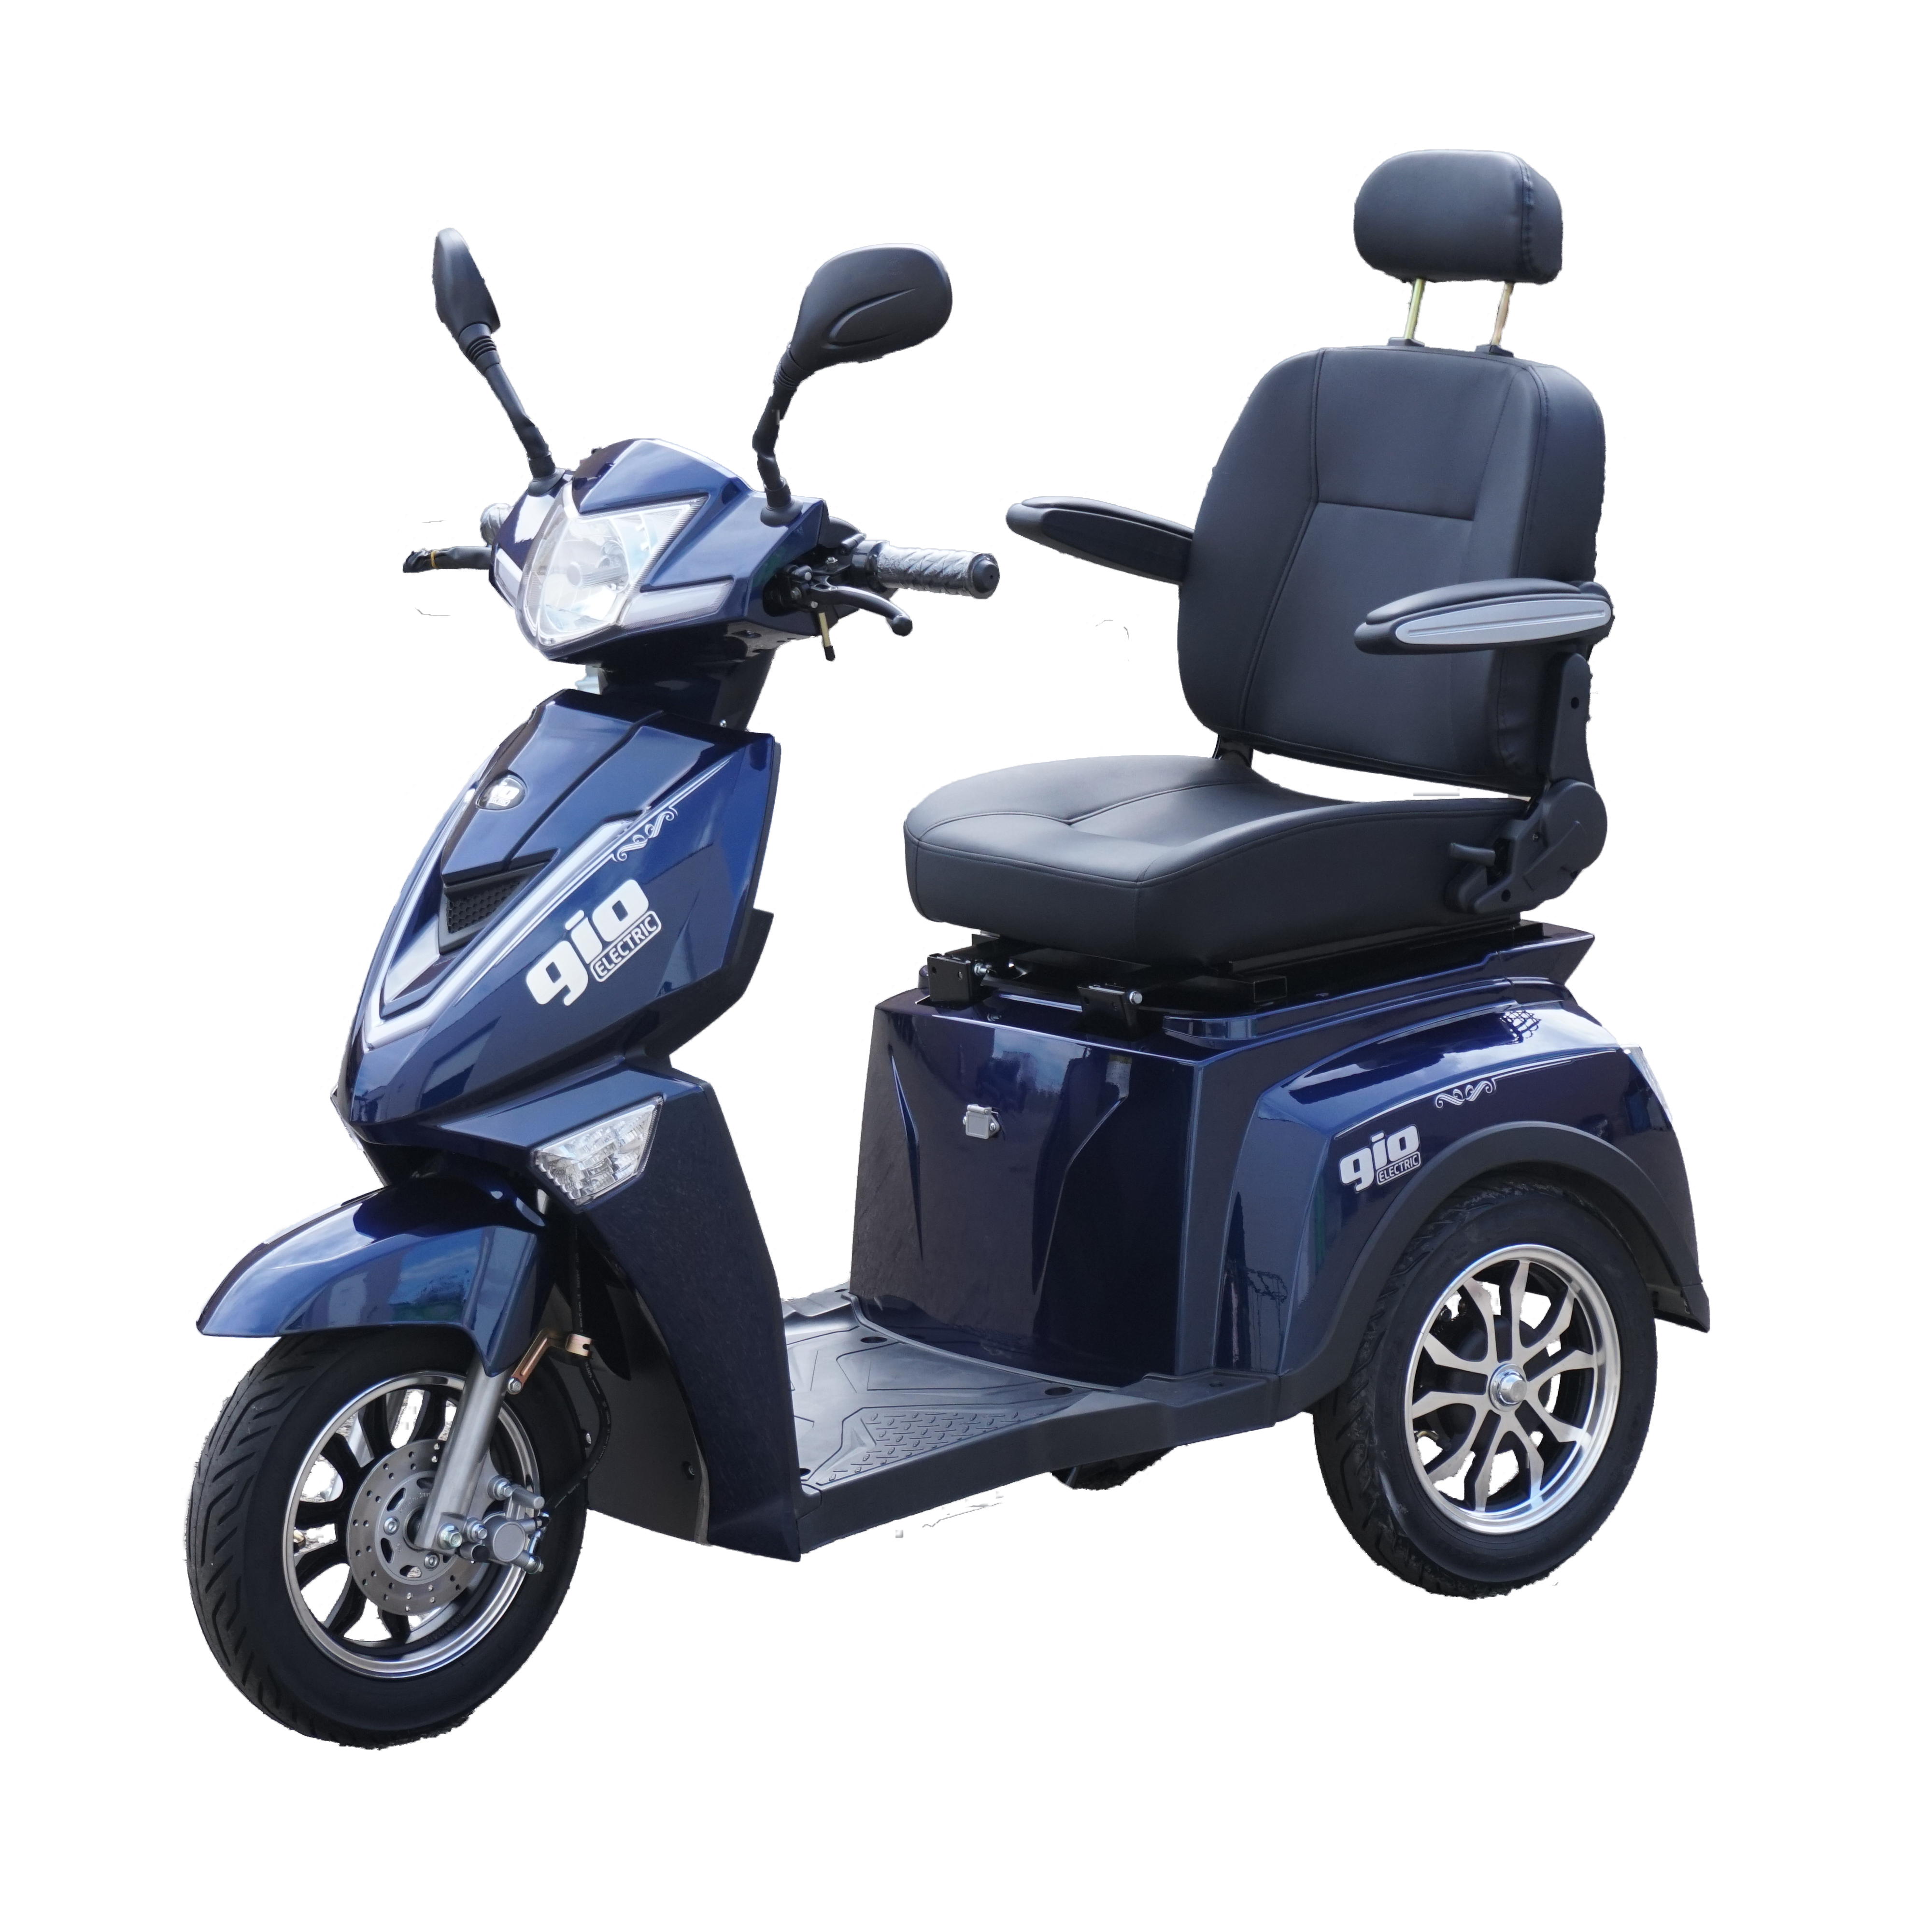 Best deals on Electric Mobility Scooters in Edmonton Alberta Canada. We have 3 or 4 Wheel Mobility Scooters with up to 2 people that can ride. Affordable prices mobility scooters from 500W to 1000W Motors. Street Legal No License Required. Forward and Reverse. Best travel mobility scooter. Basket & backup camera. 